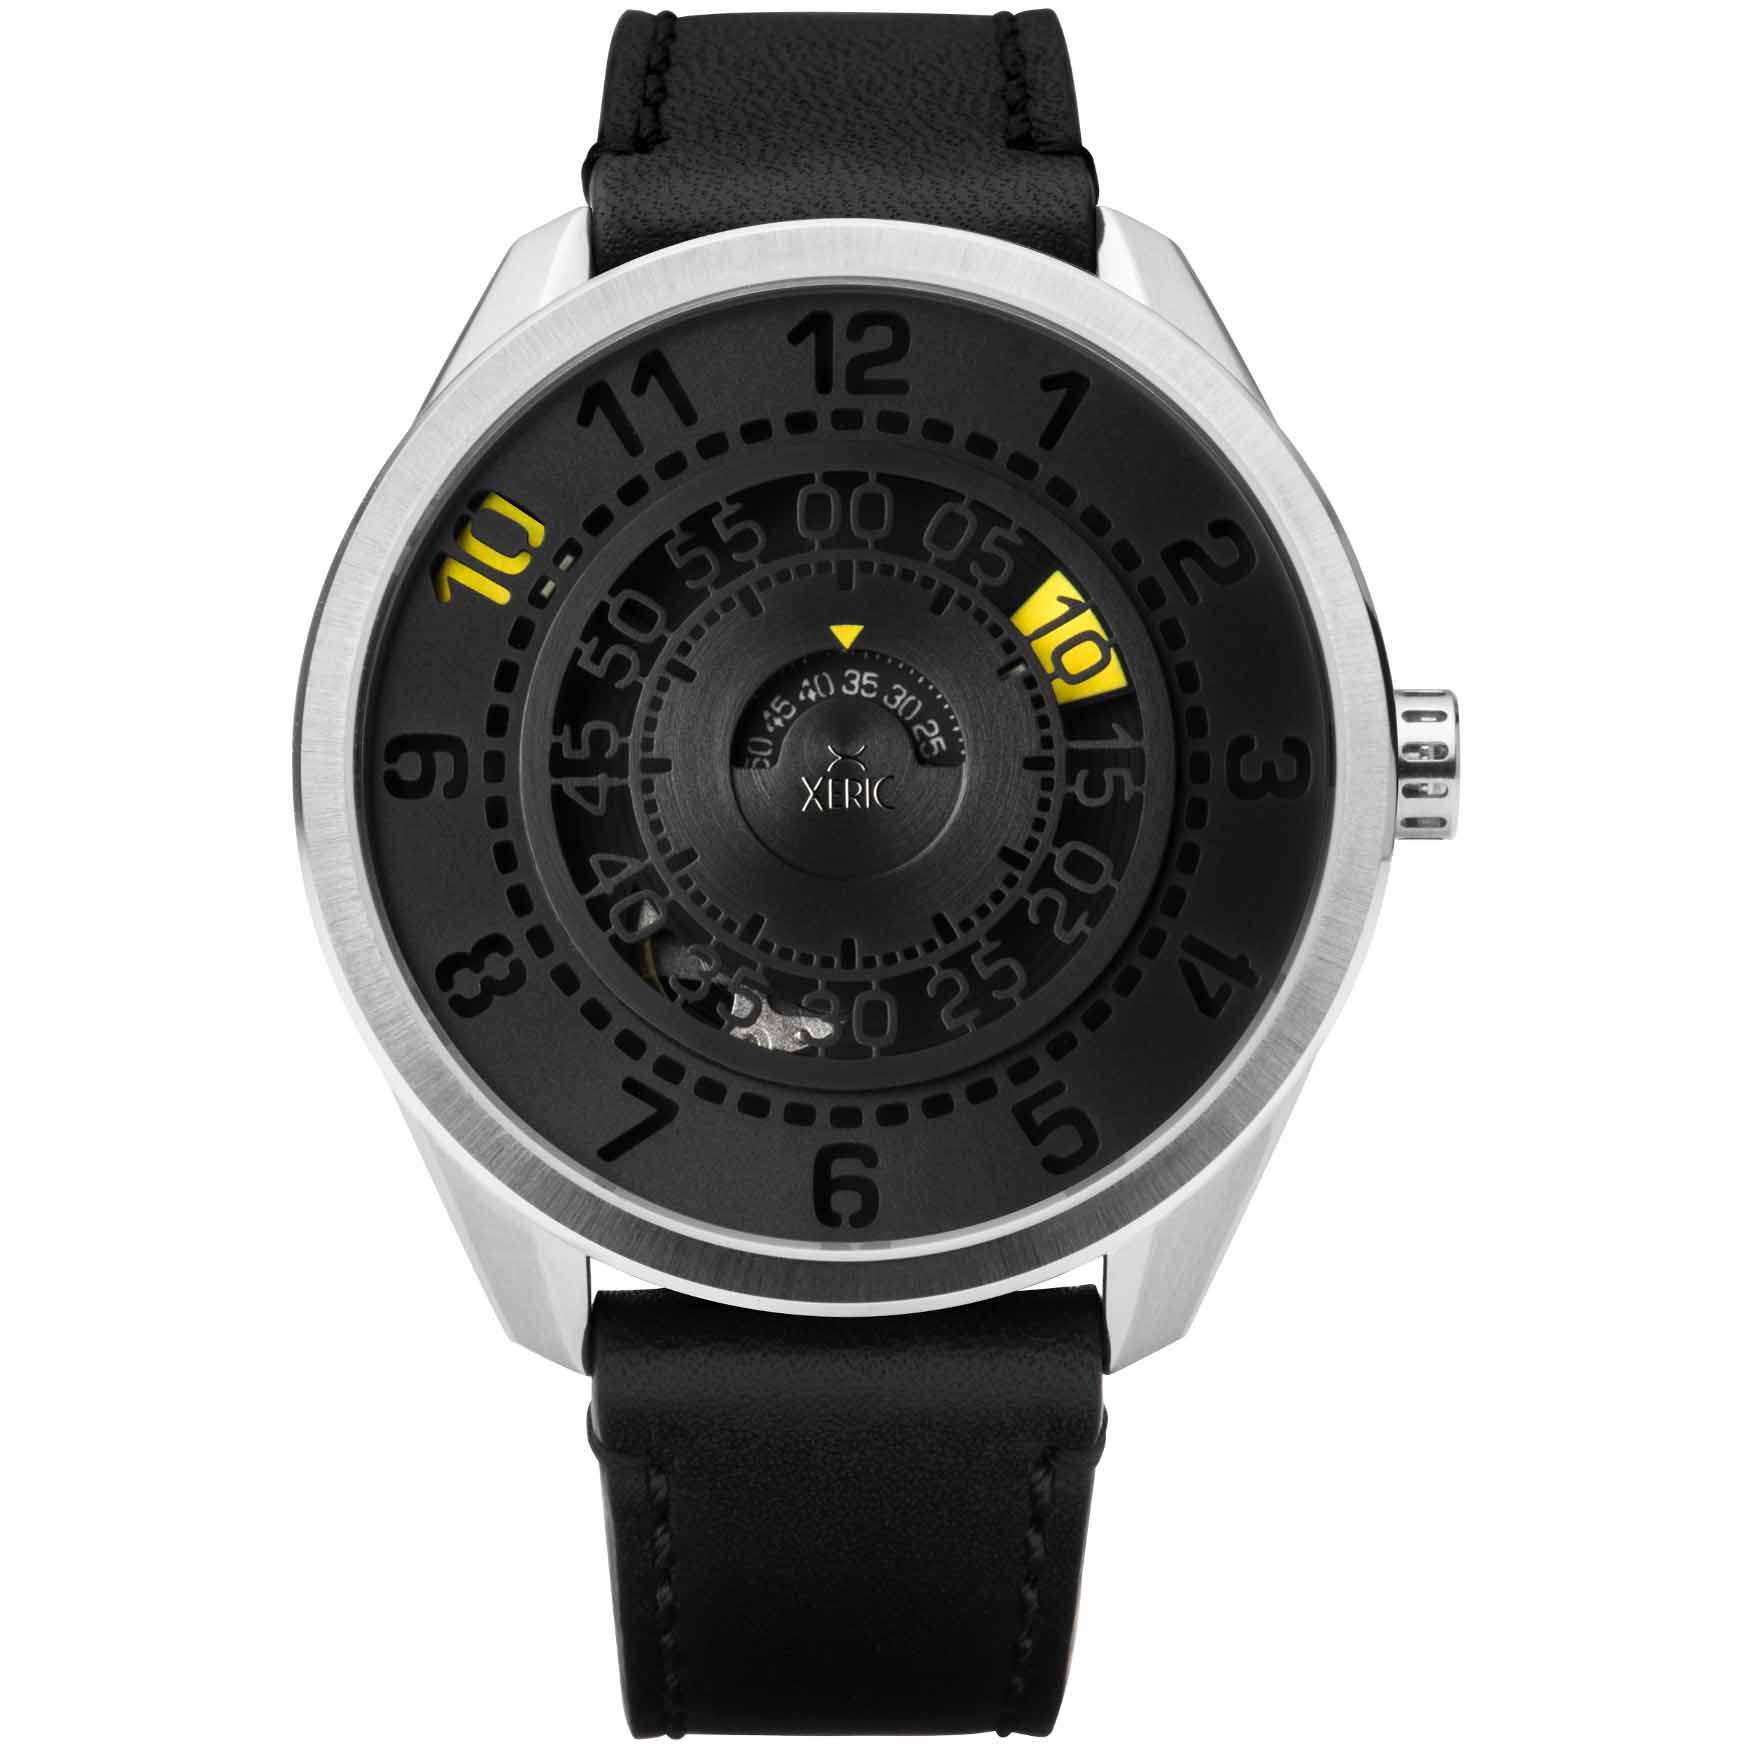 SWF Cipher Chrono Watch Face - Apps on Google Play